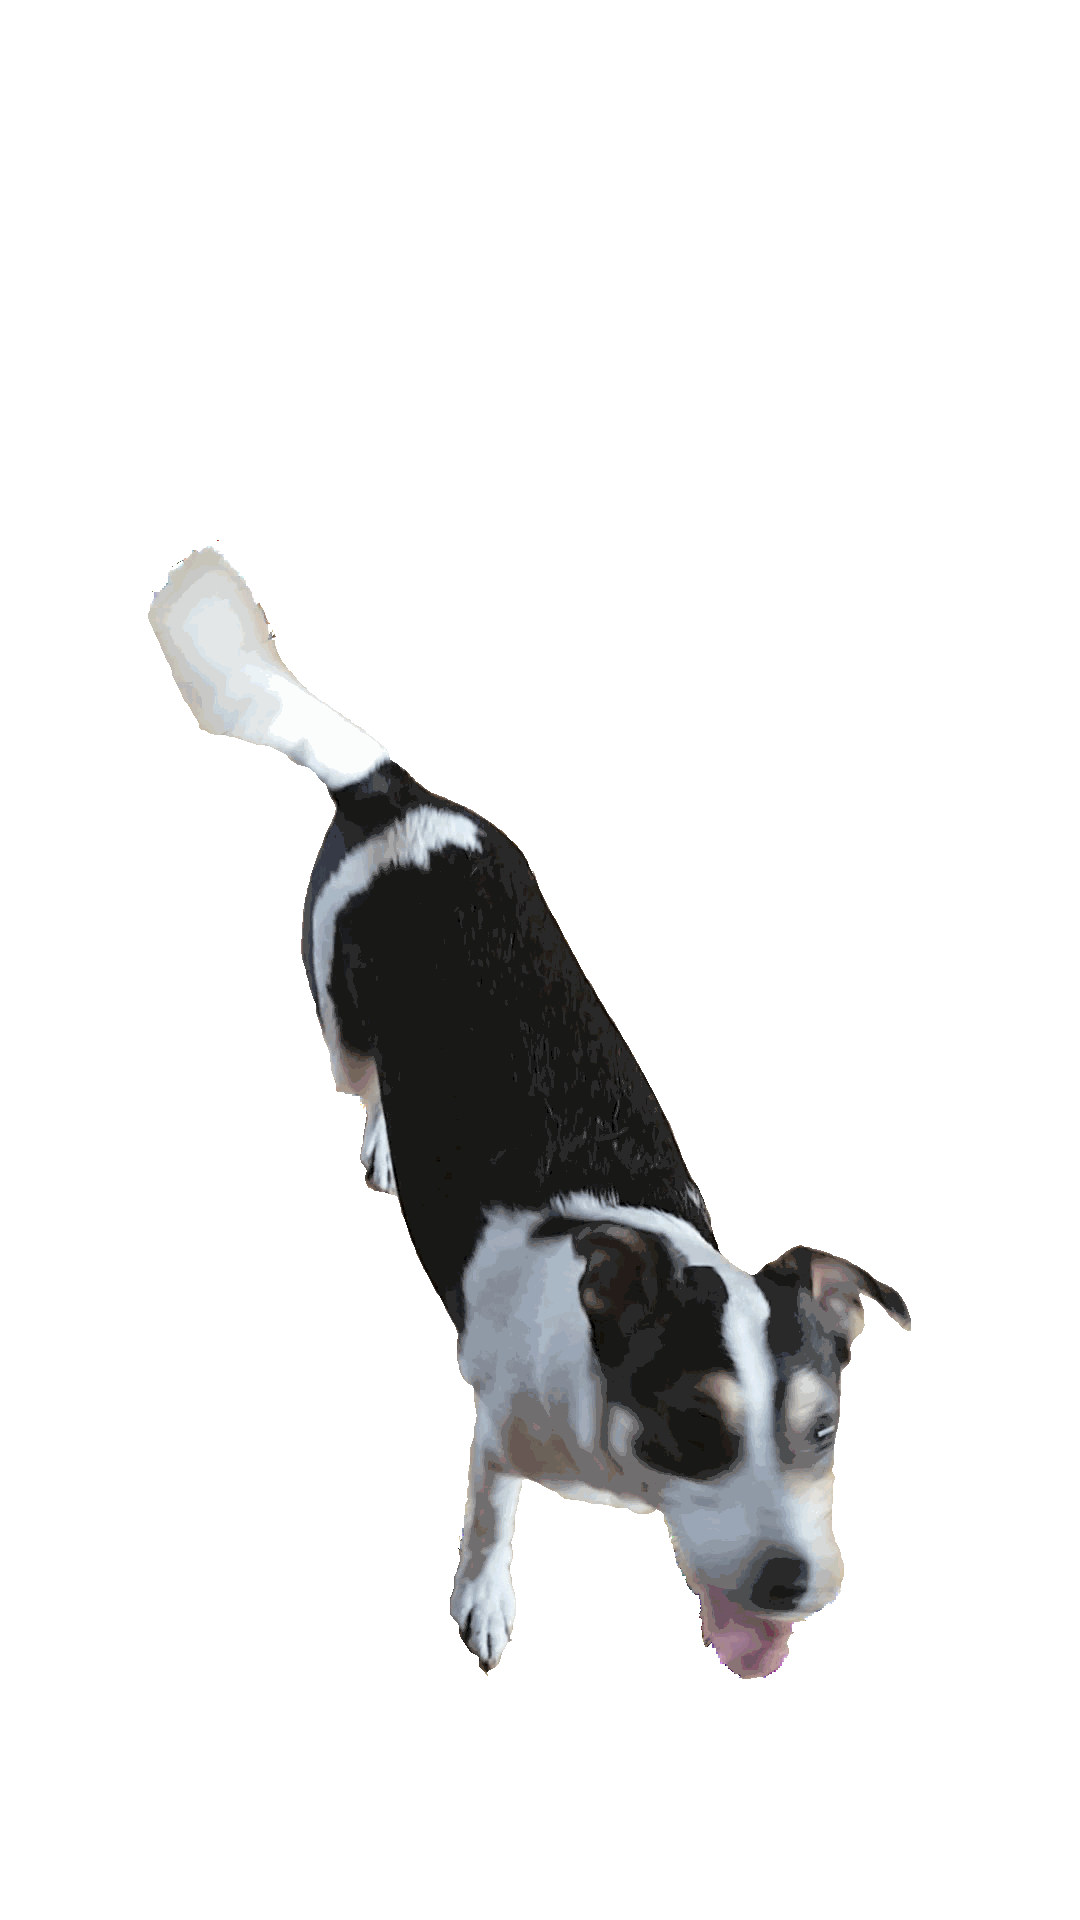 Animation of a dog dancing on its hind legs